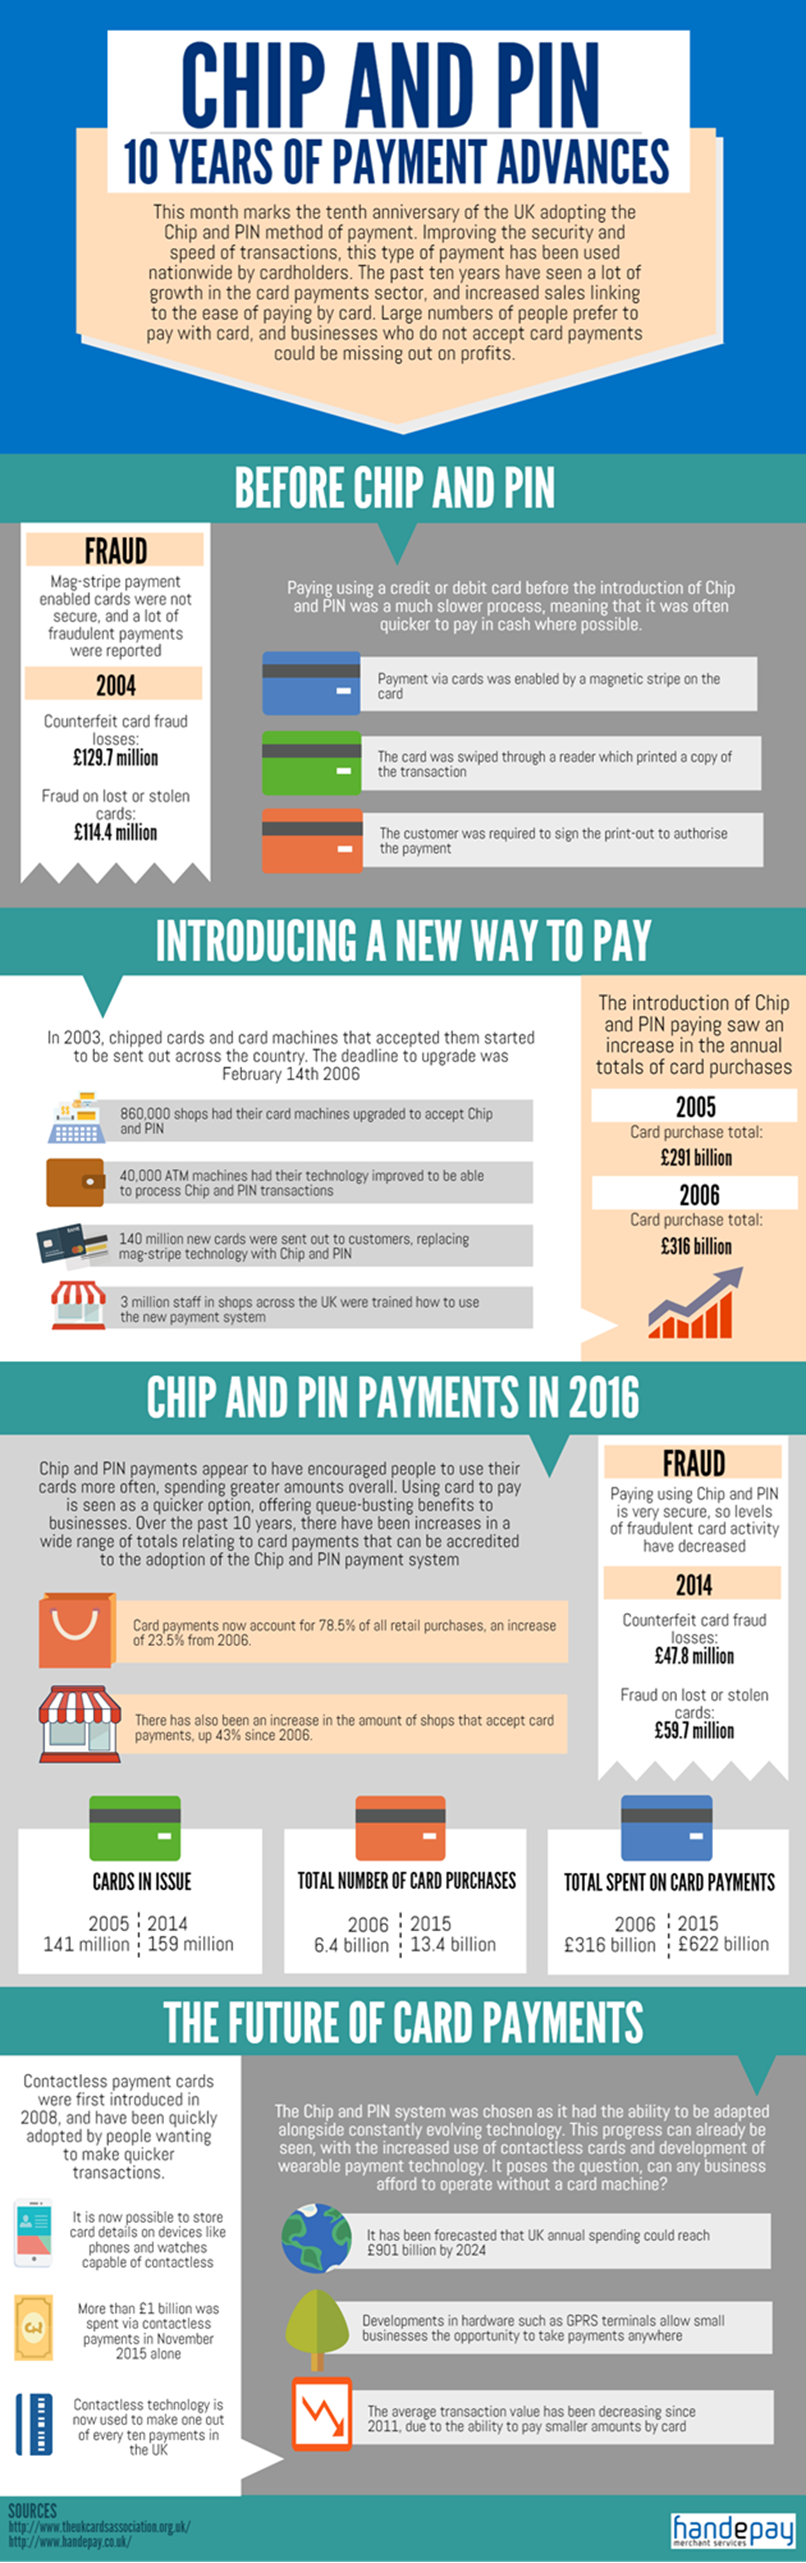 Infographic showing chip and pin 10 years payment advances